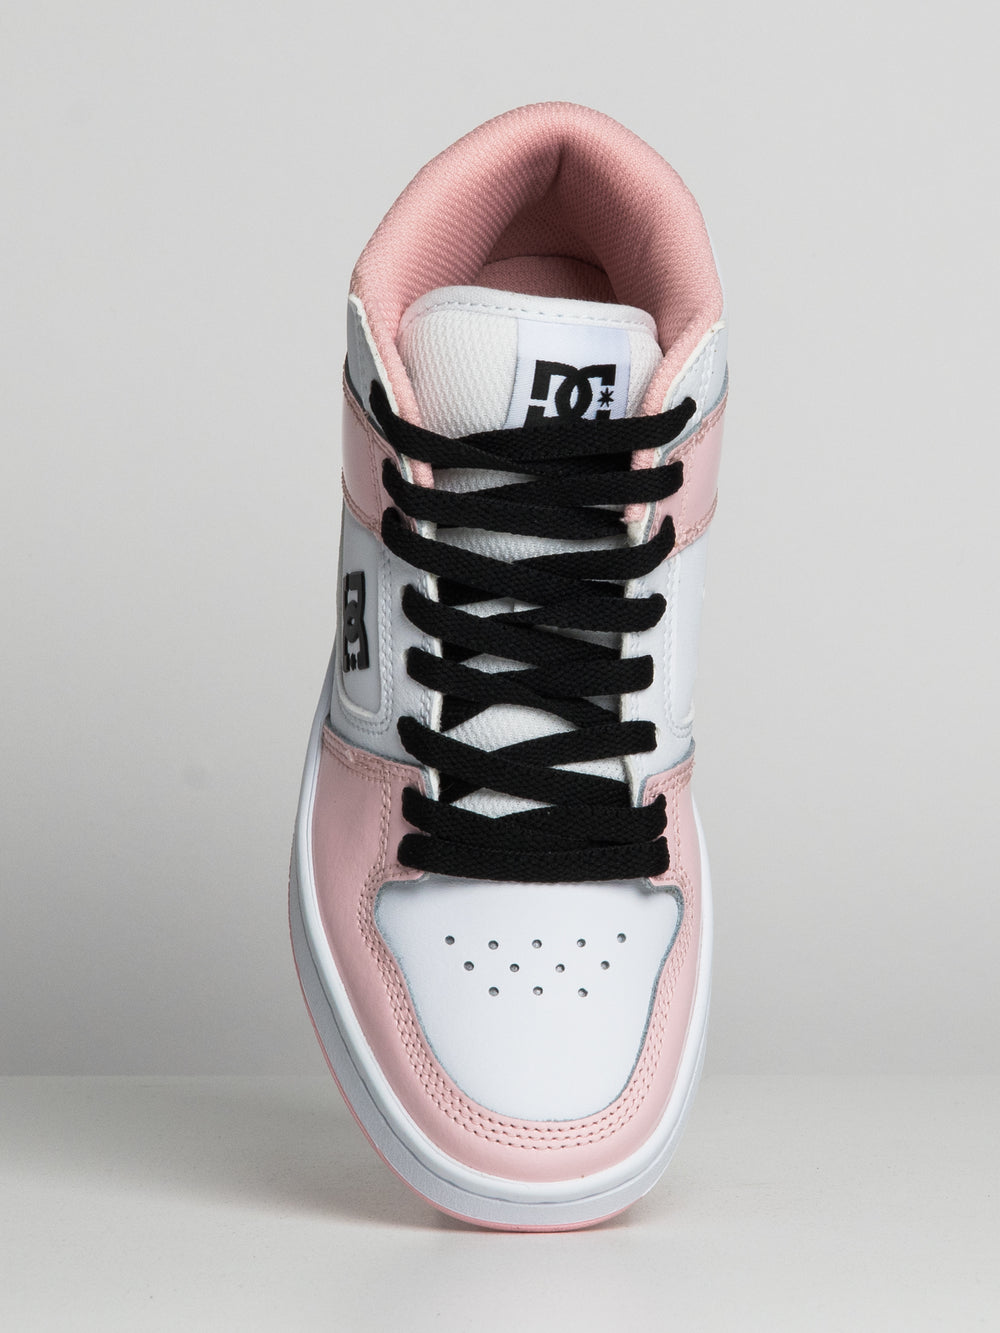 WOMENS DC SHOES MANTECA 4 MID - CLEARANCE